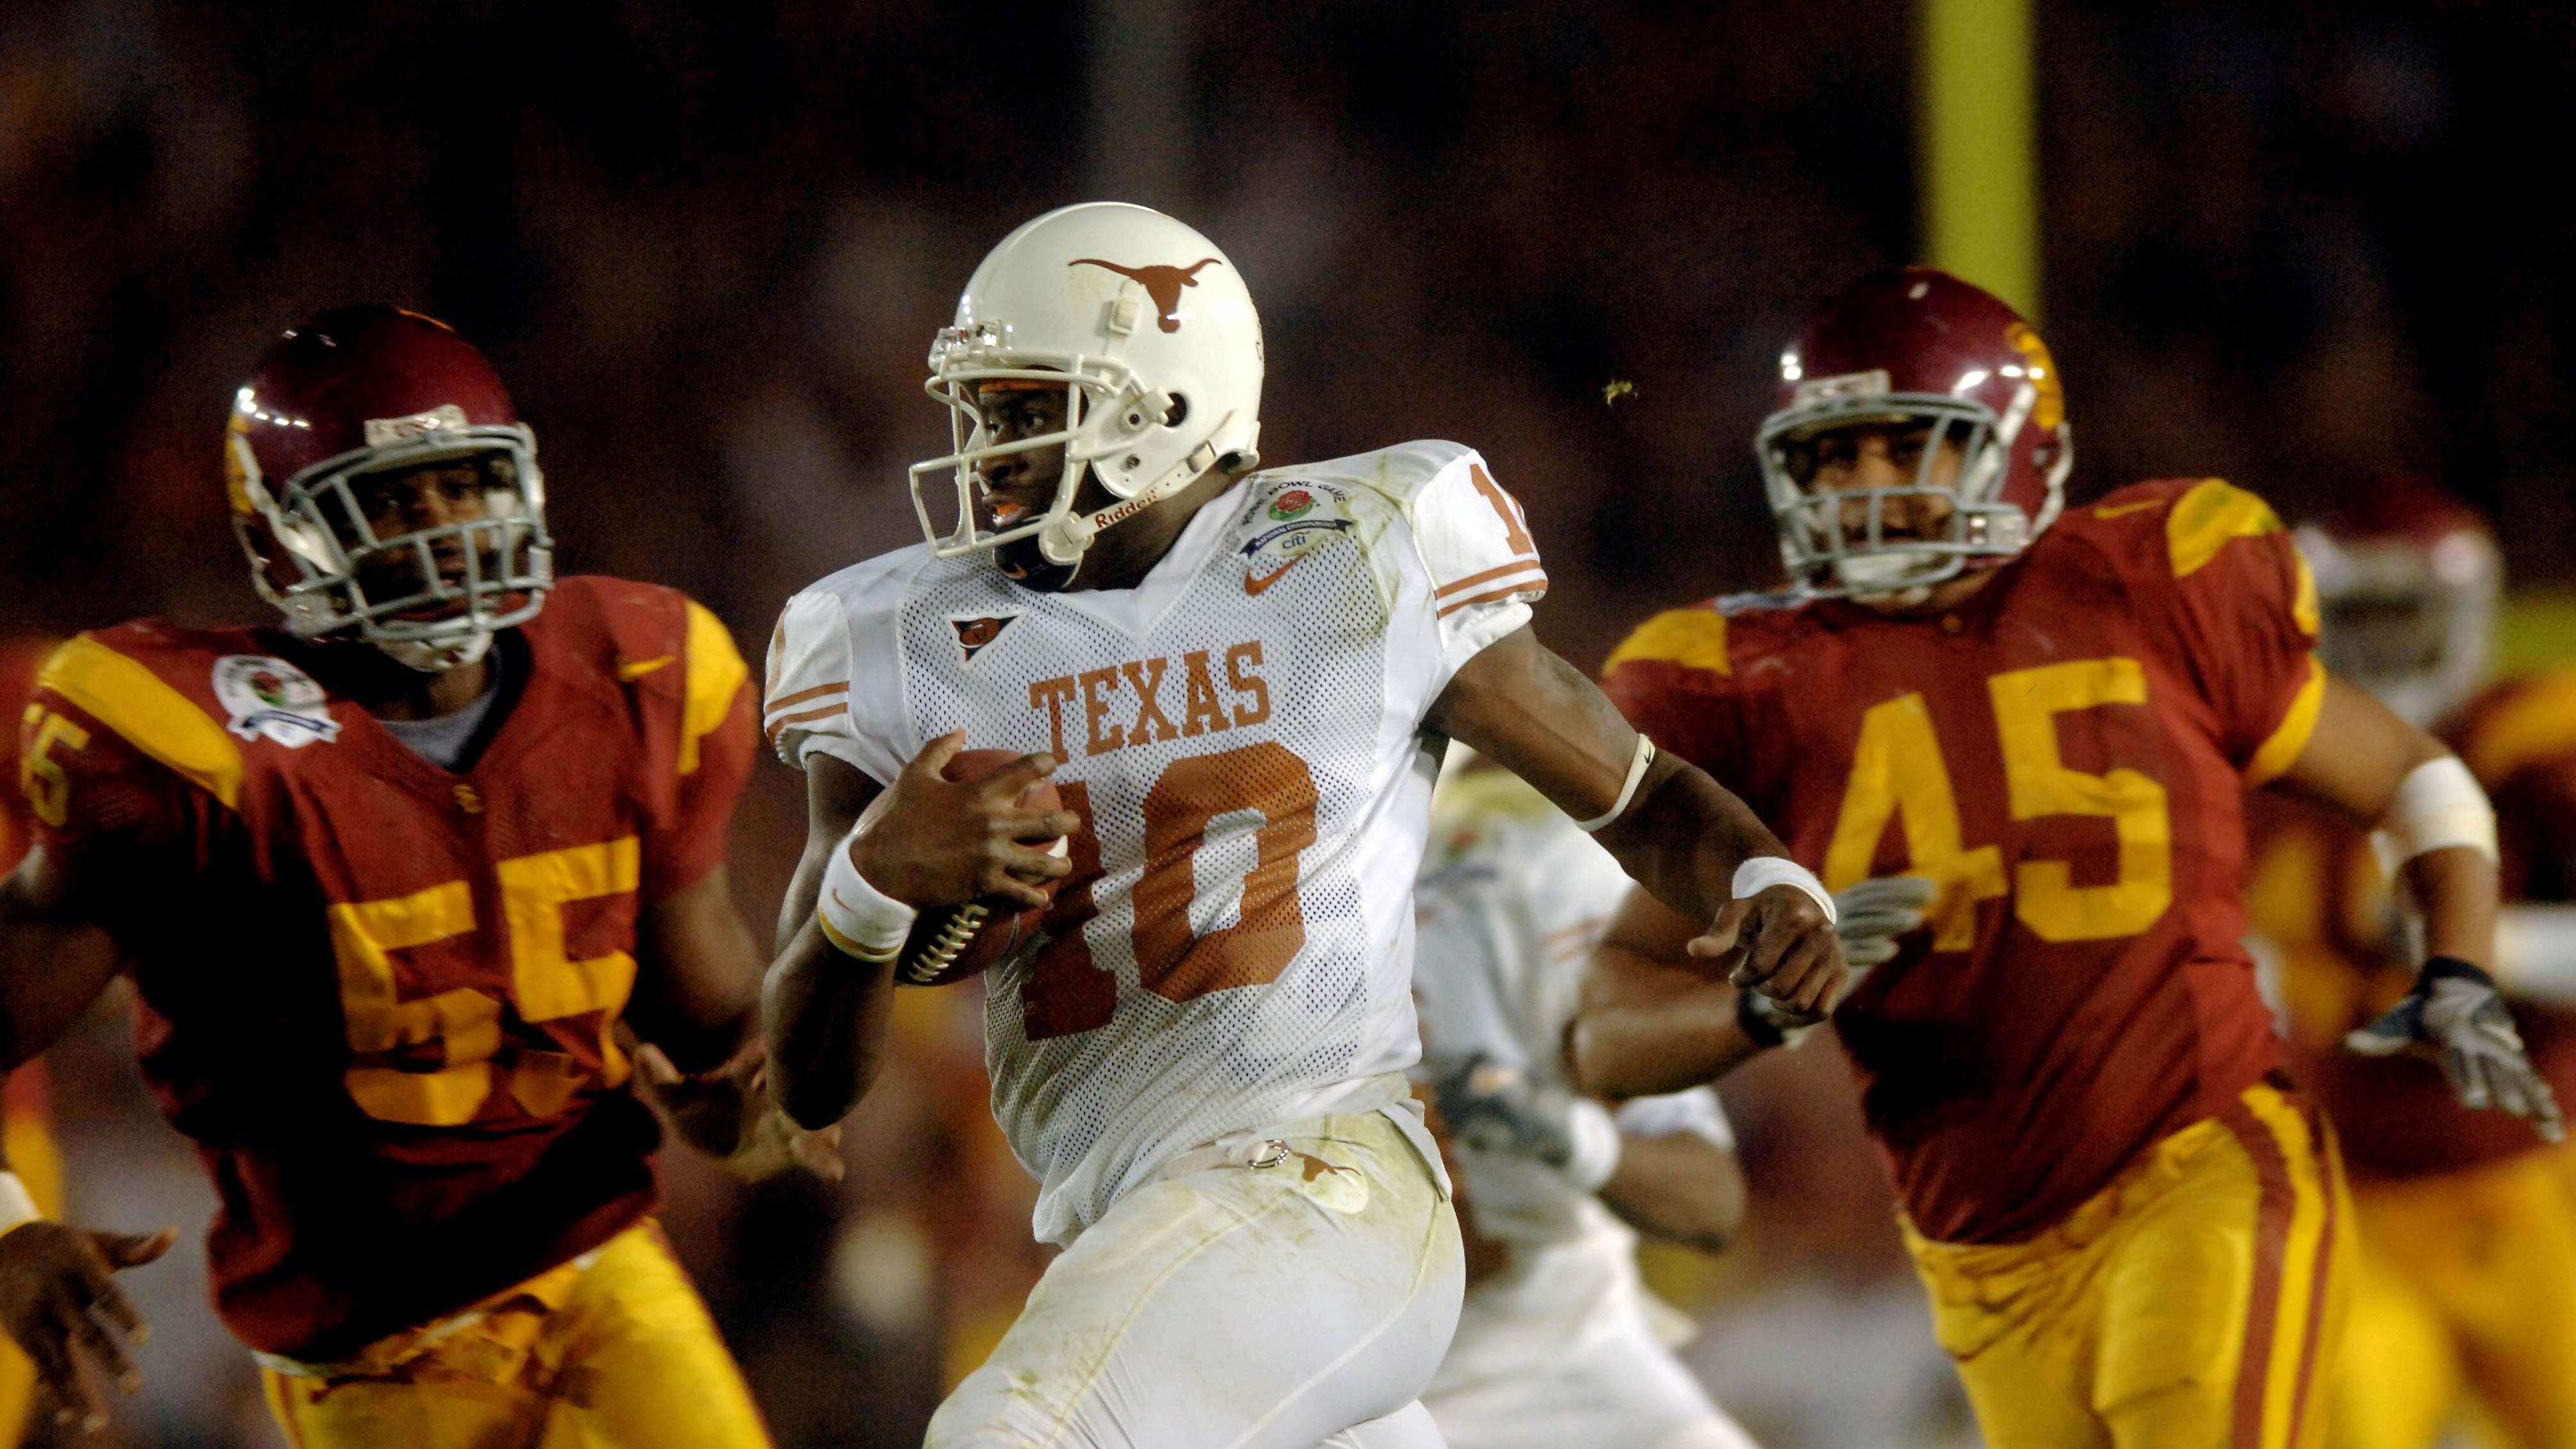 Official Texas Longhorns All-Time Great Where Legends Are Made